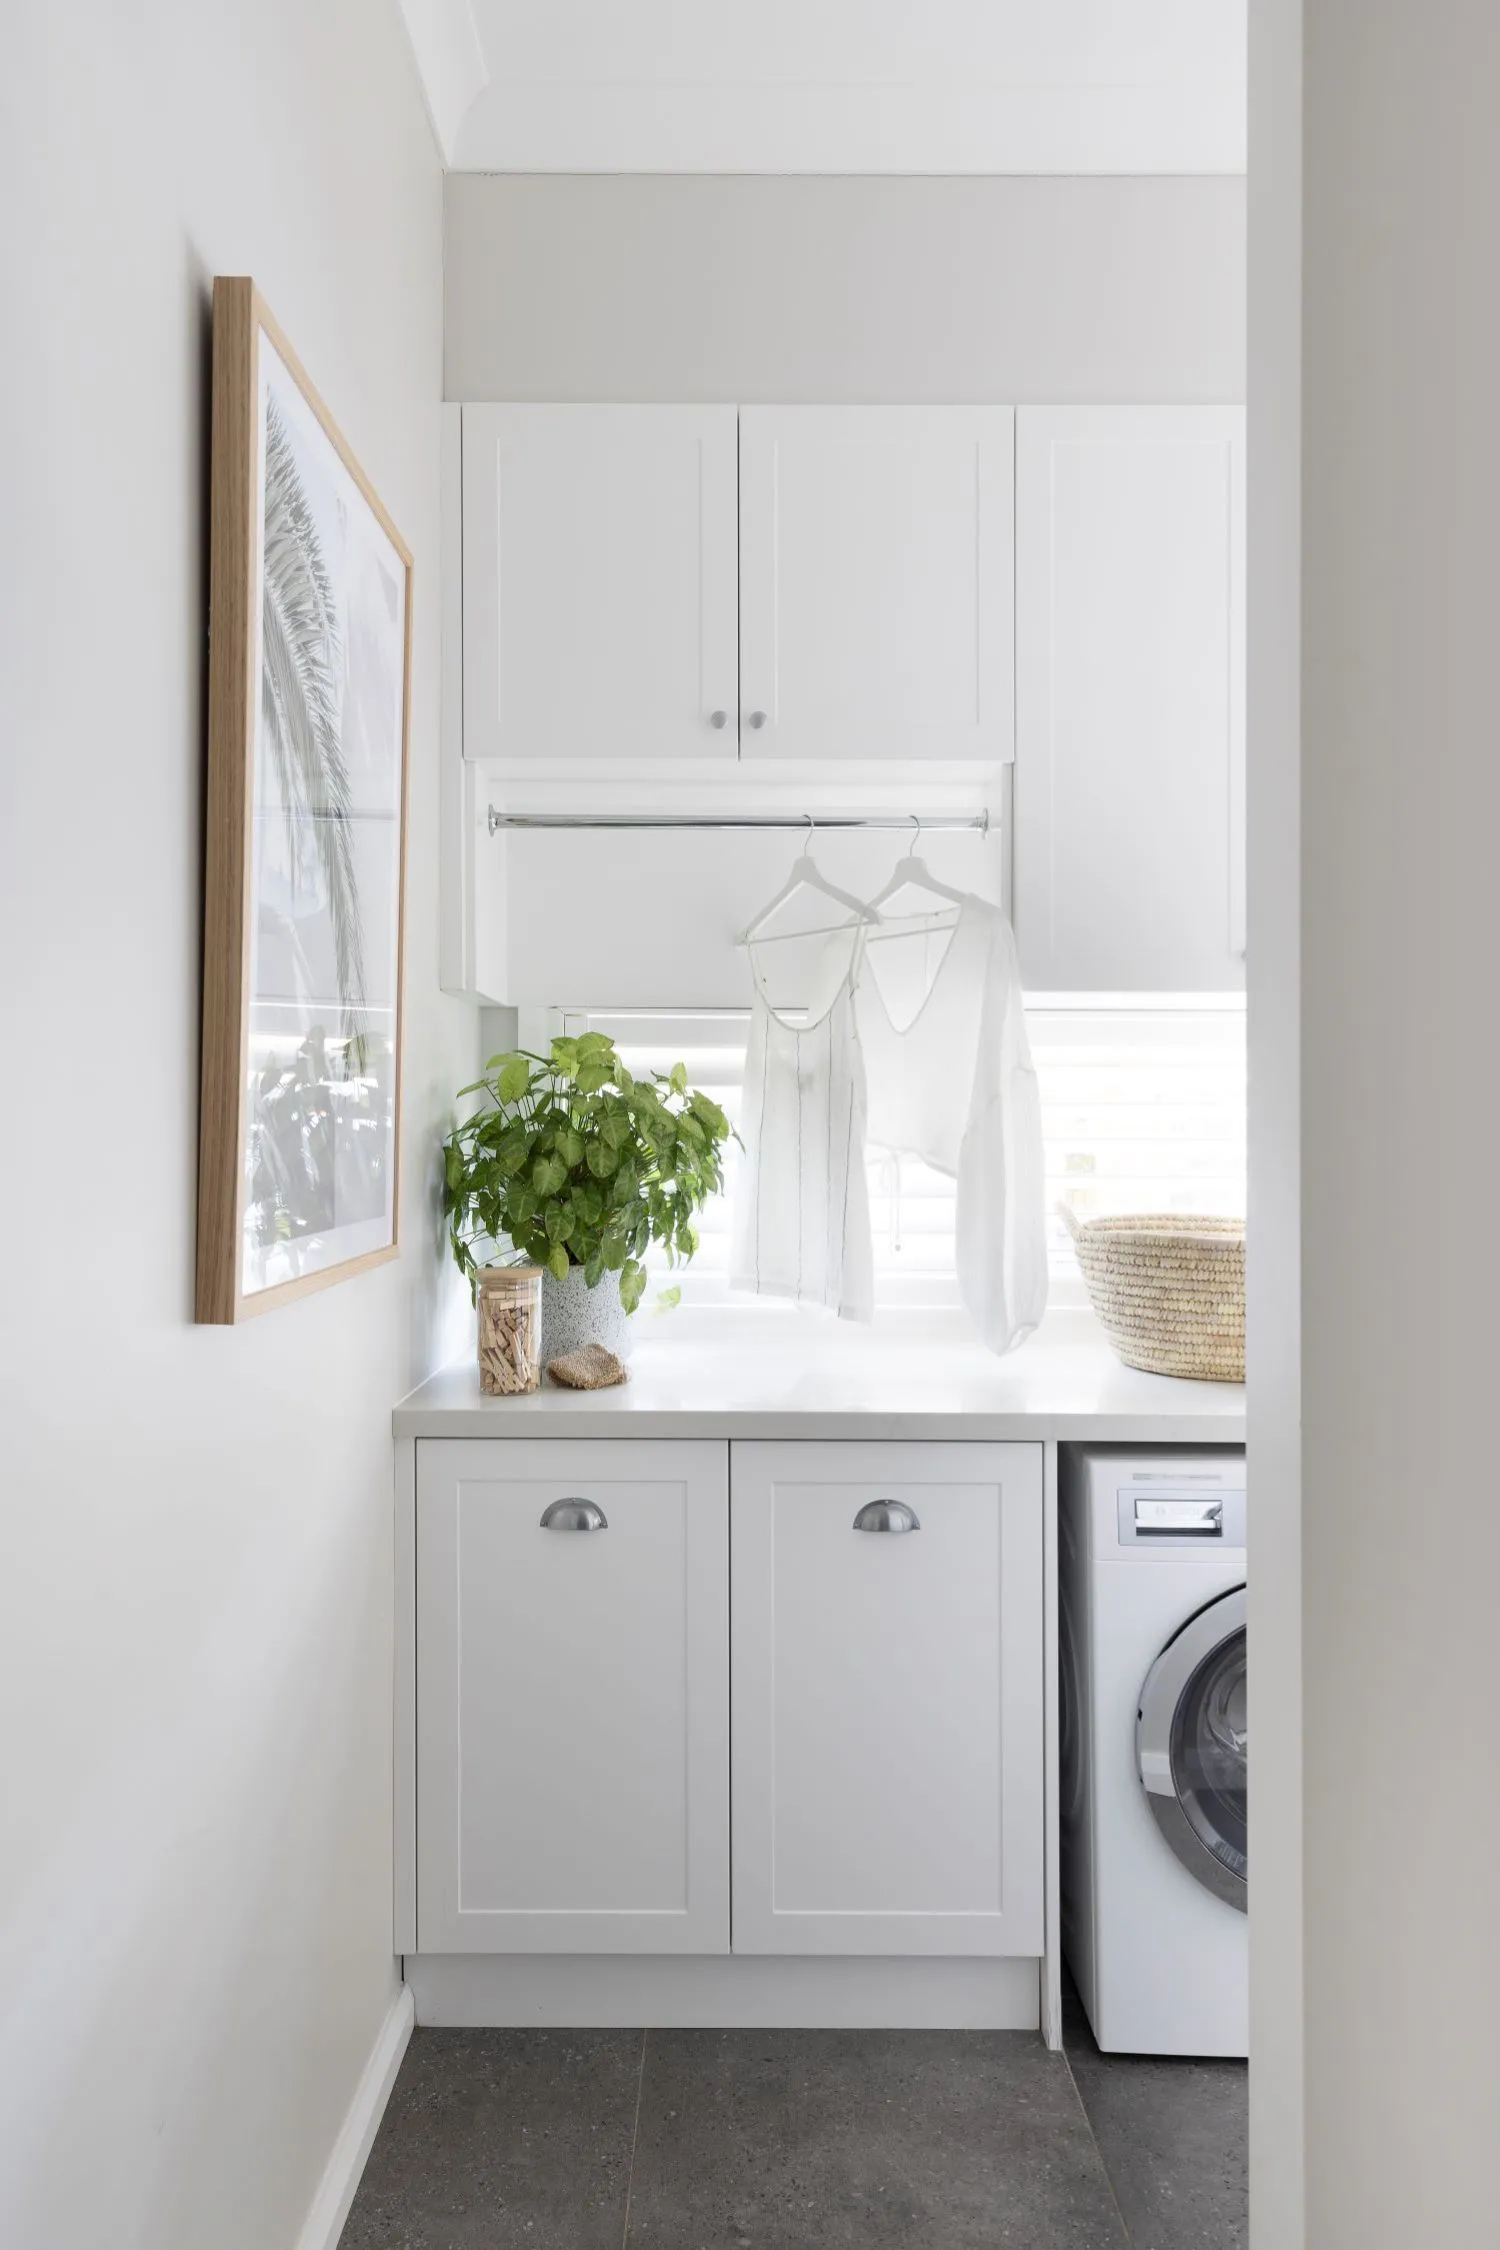 30 Small Laundry Ideas You Need to Know About - Style Sourcebook